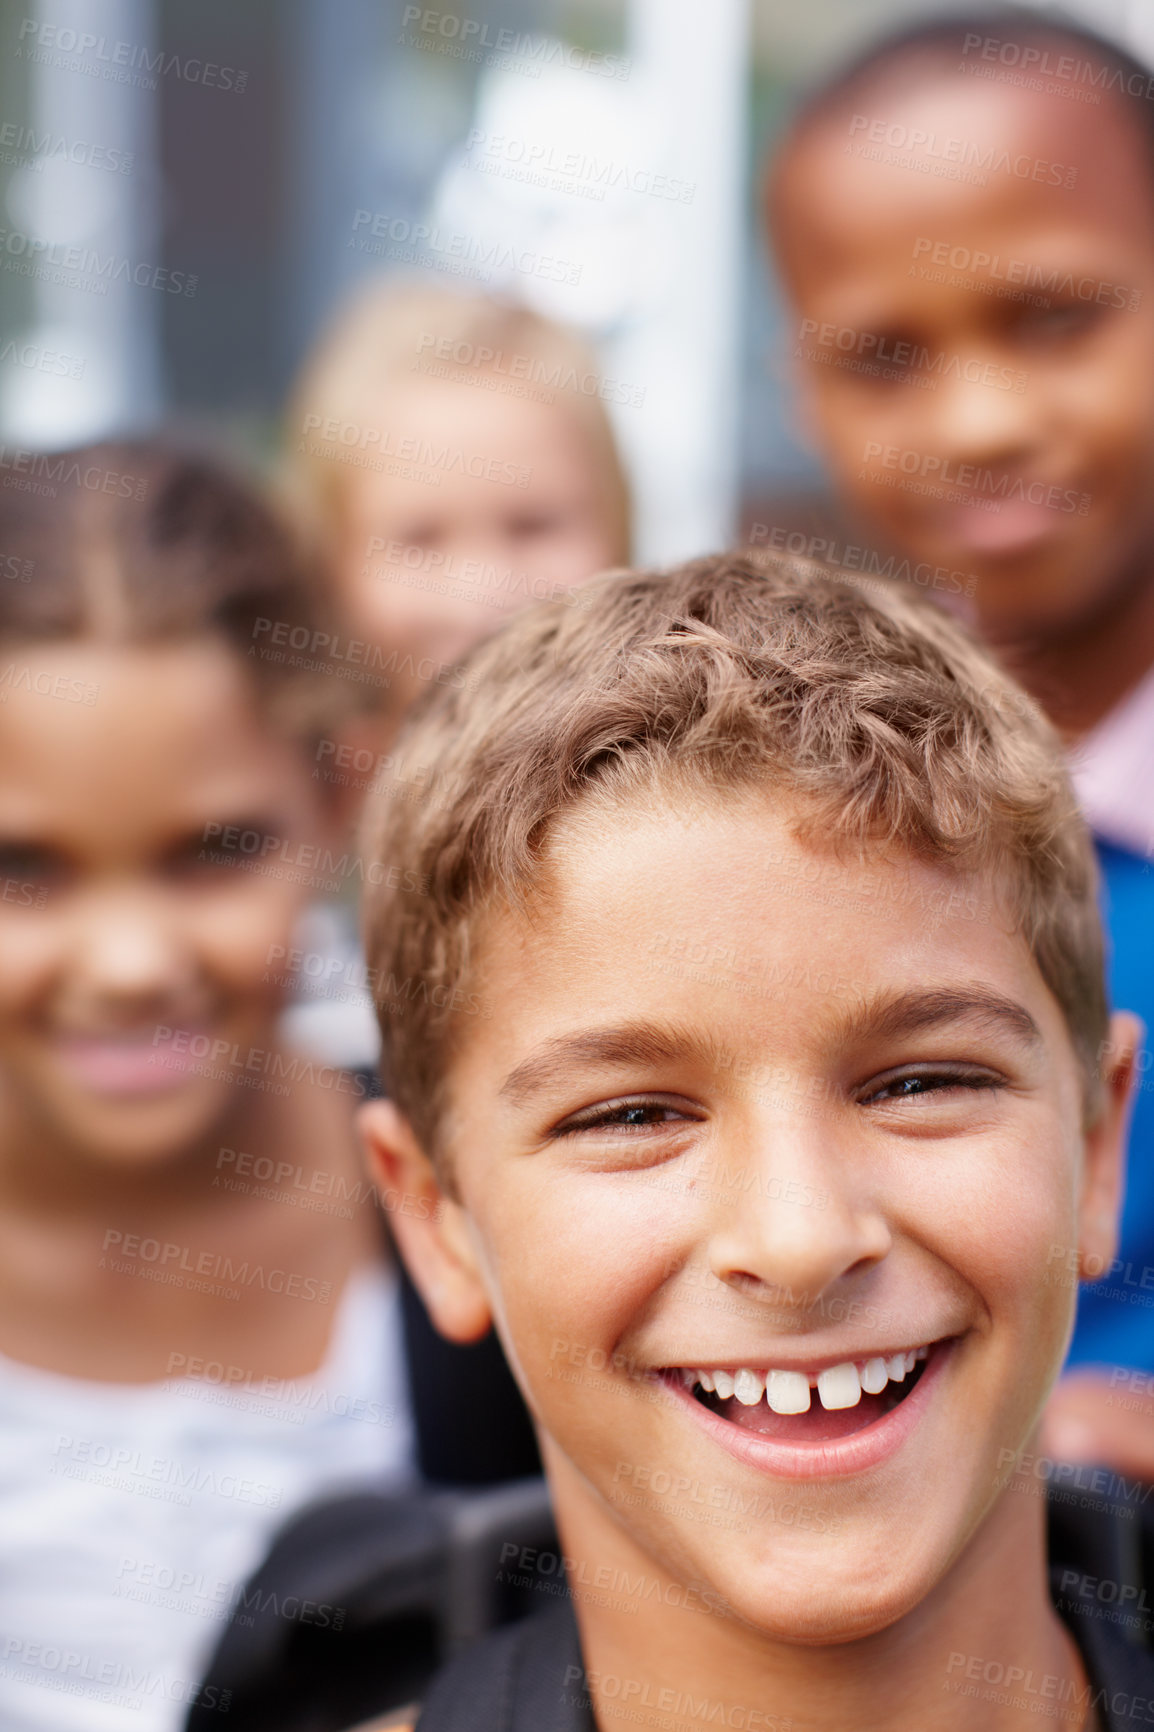 Buy stock photo Closeup of a laughing little boy with friends in the background - copyspace